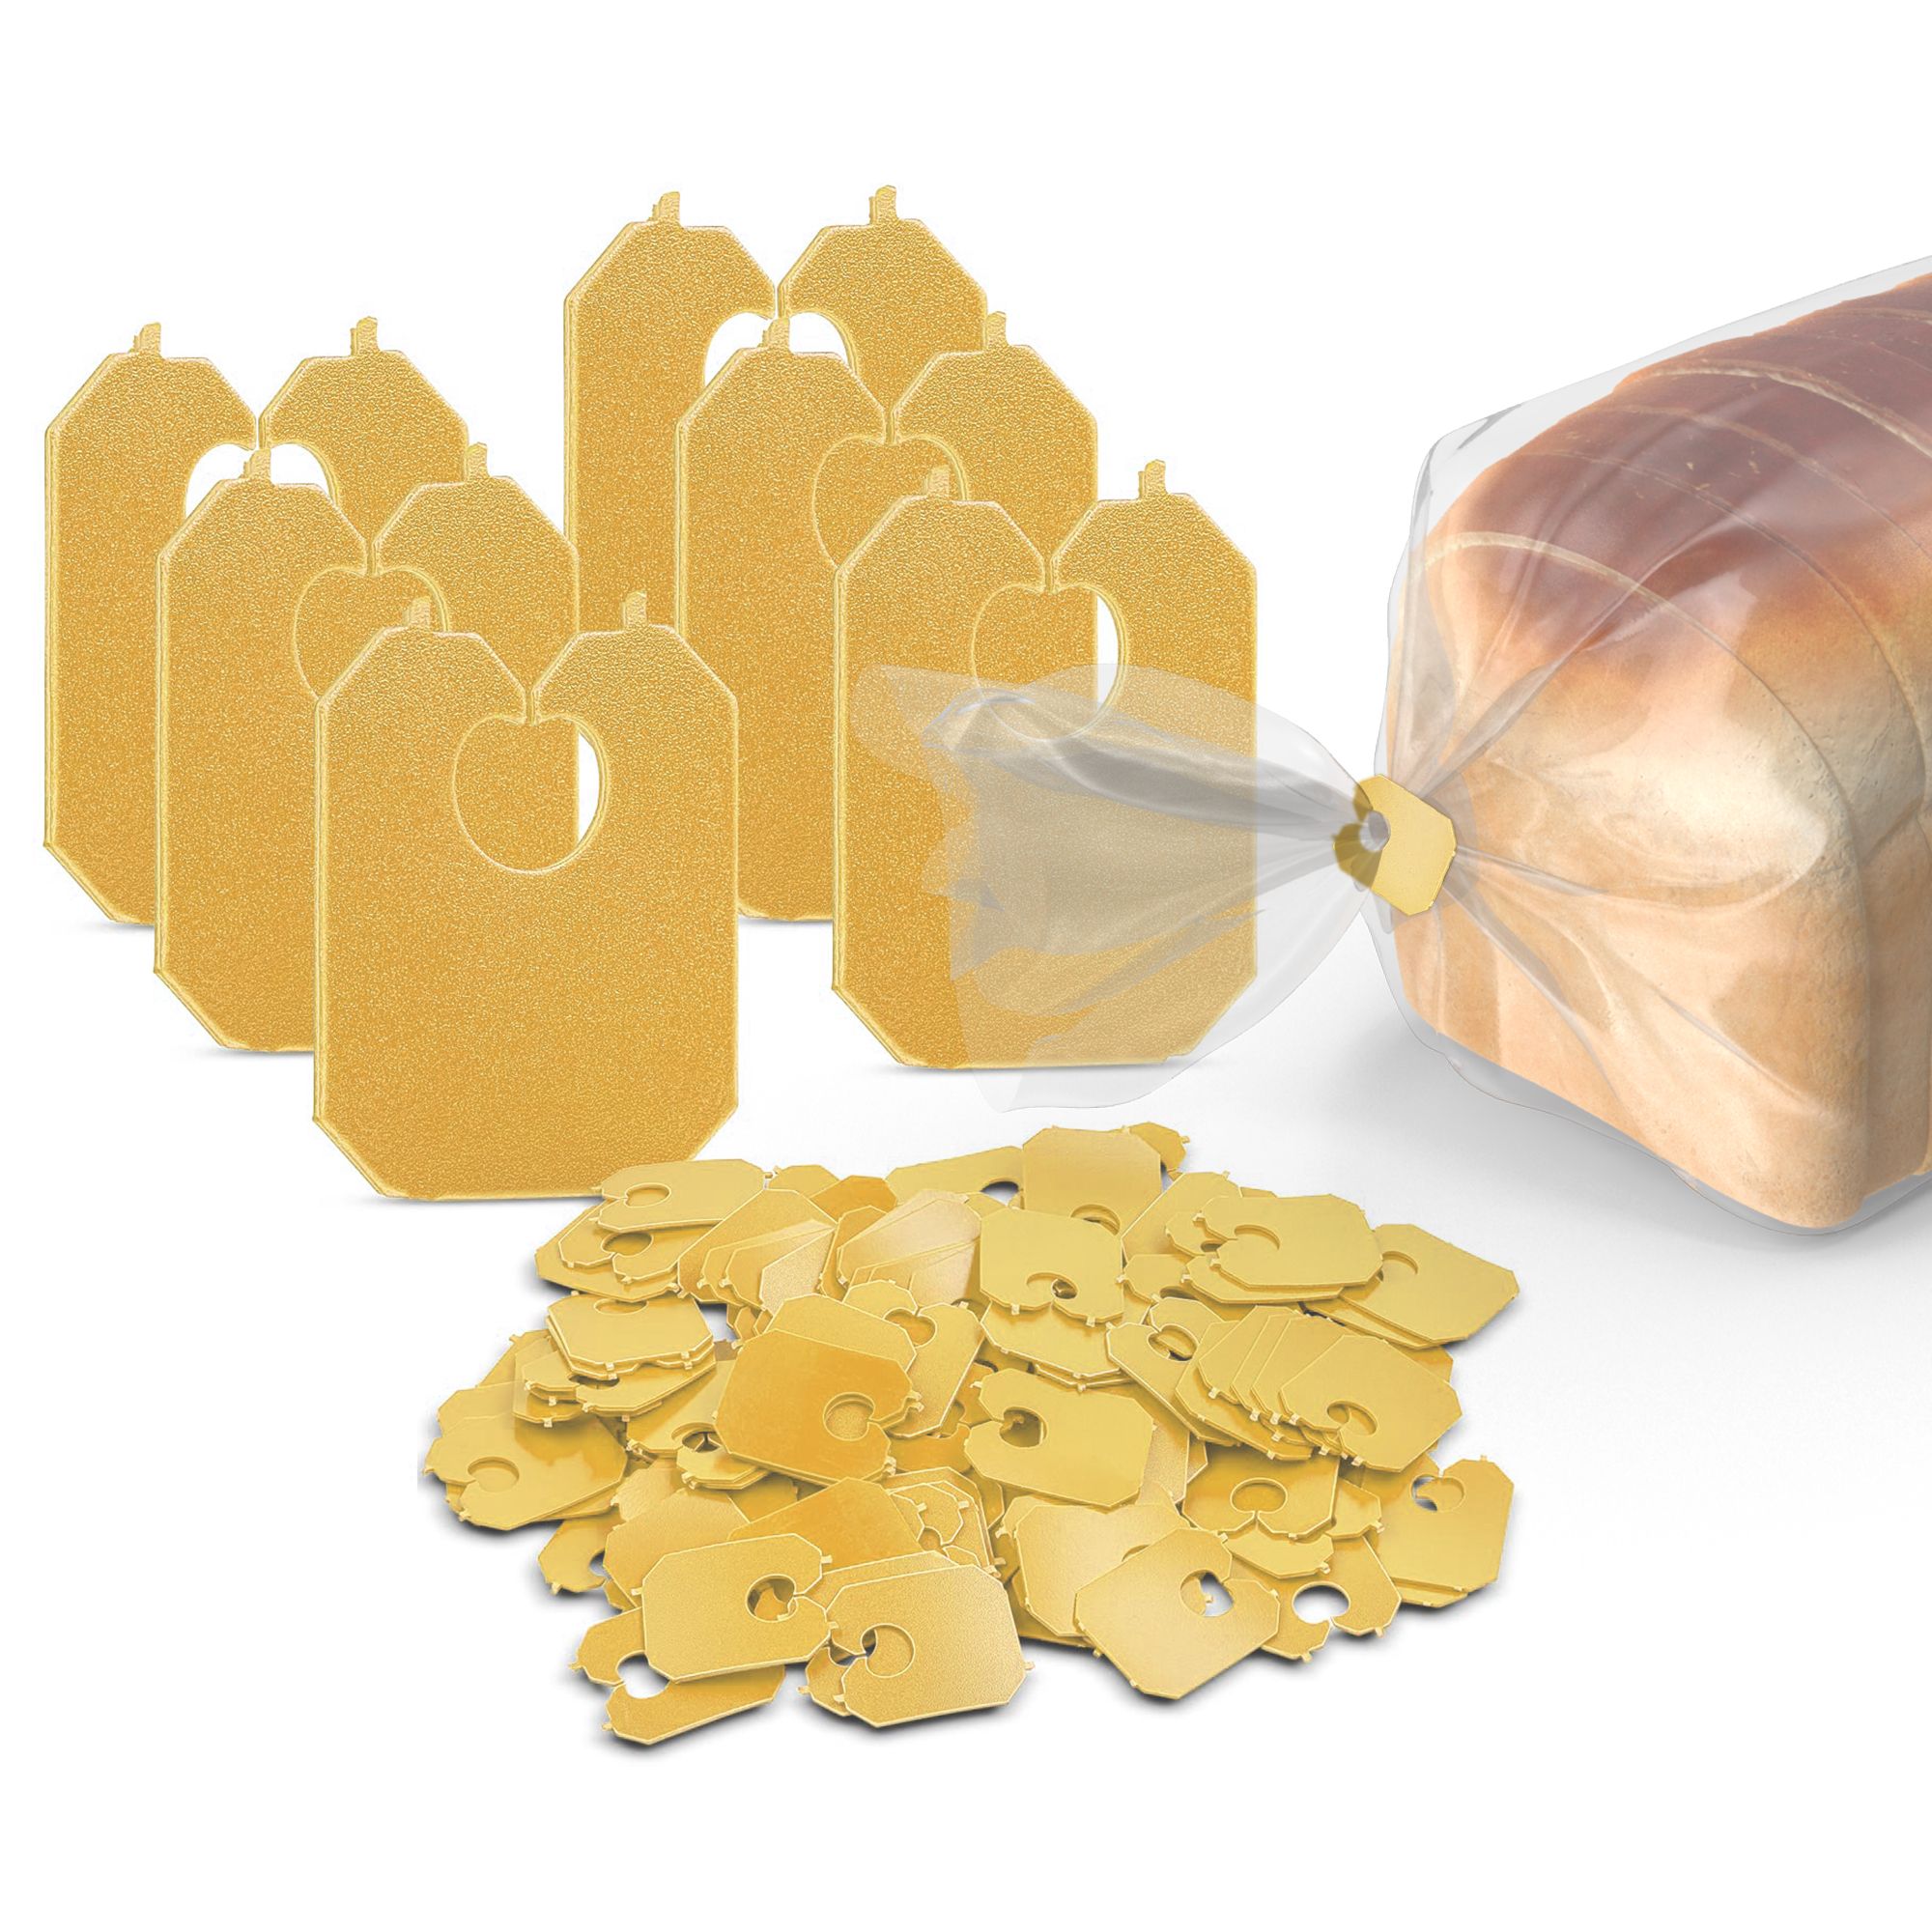 Reusable Plastic Bread Clips Keep Your Food Fresh，Also usable as Cable  Management Labels - 7/8 x 1 inches - 100 Pieces